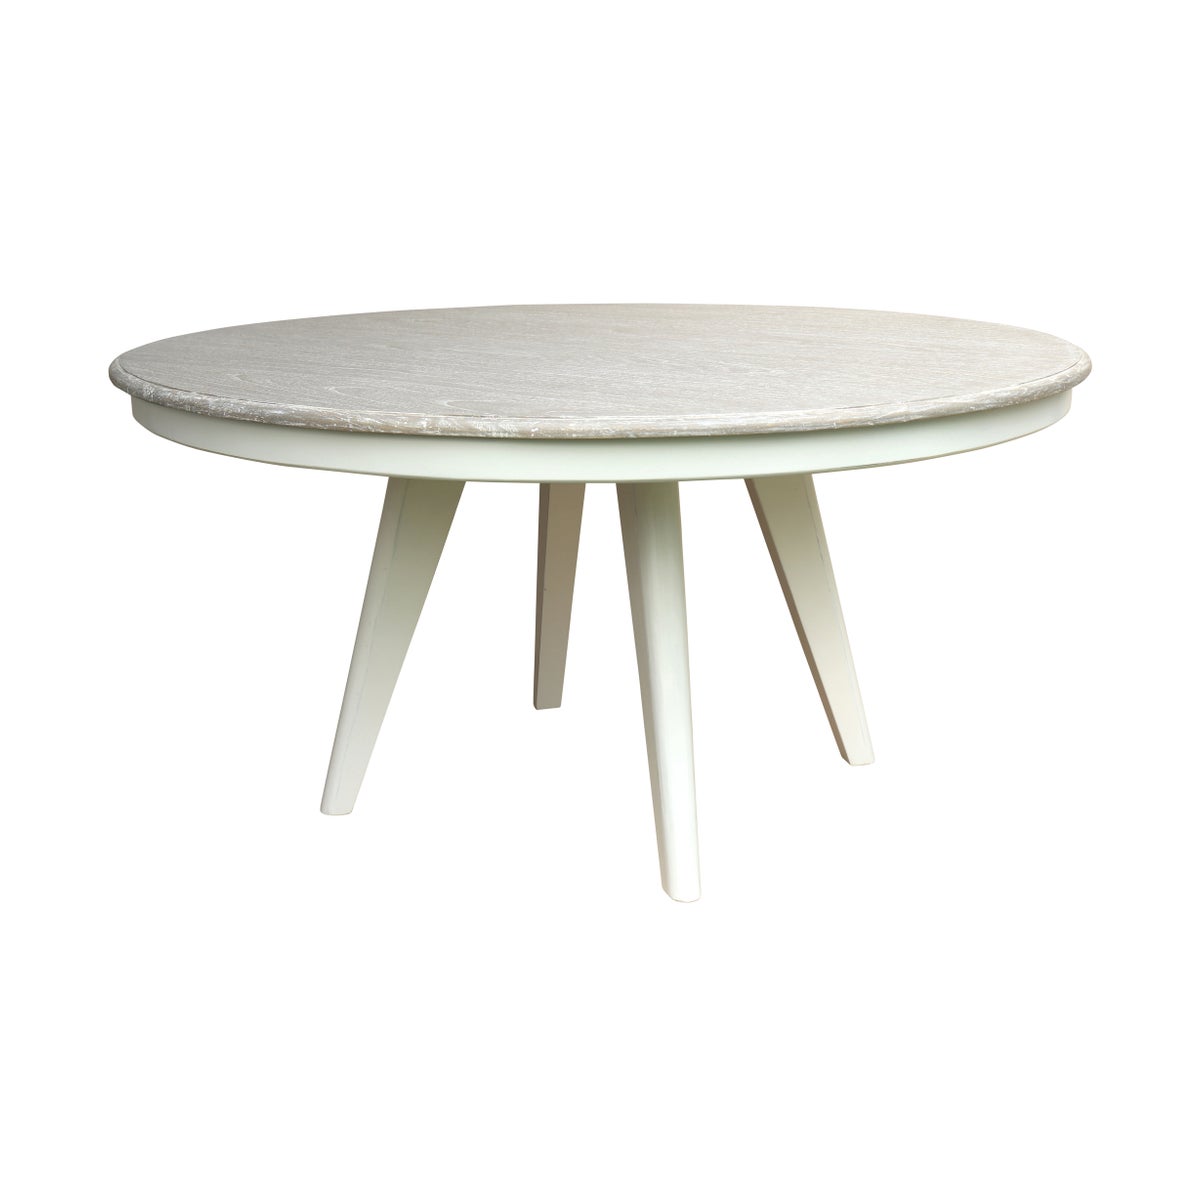 NANTUCKET ROUND DINING TABLE